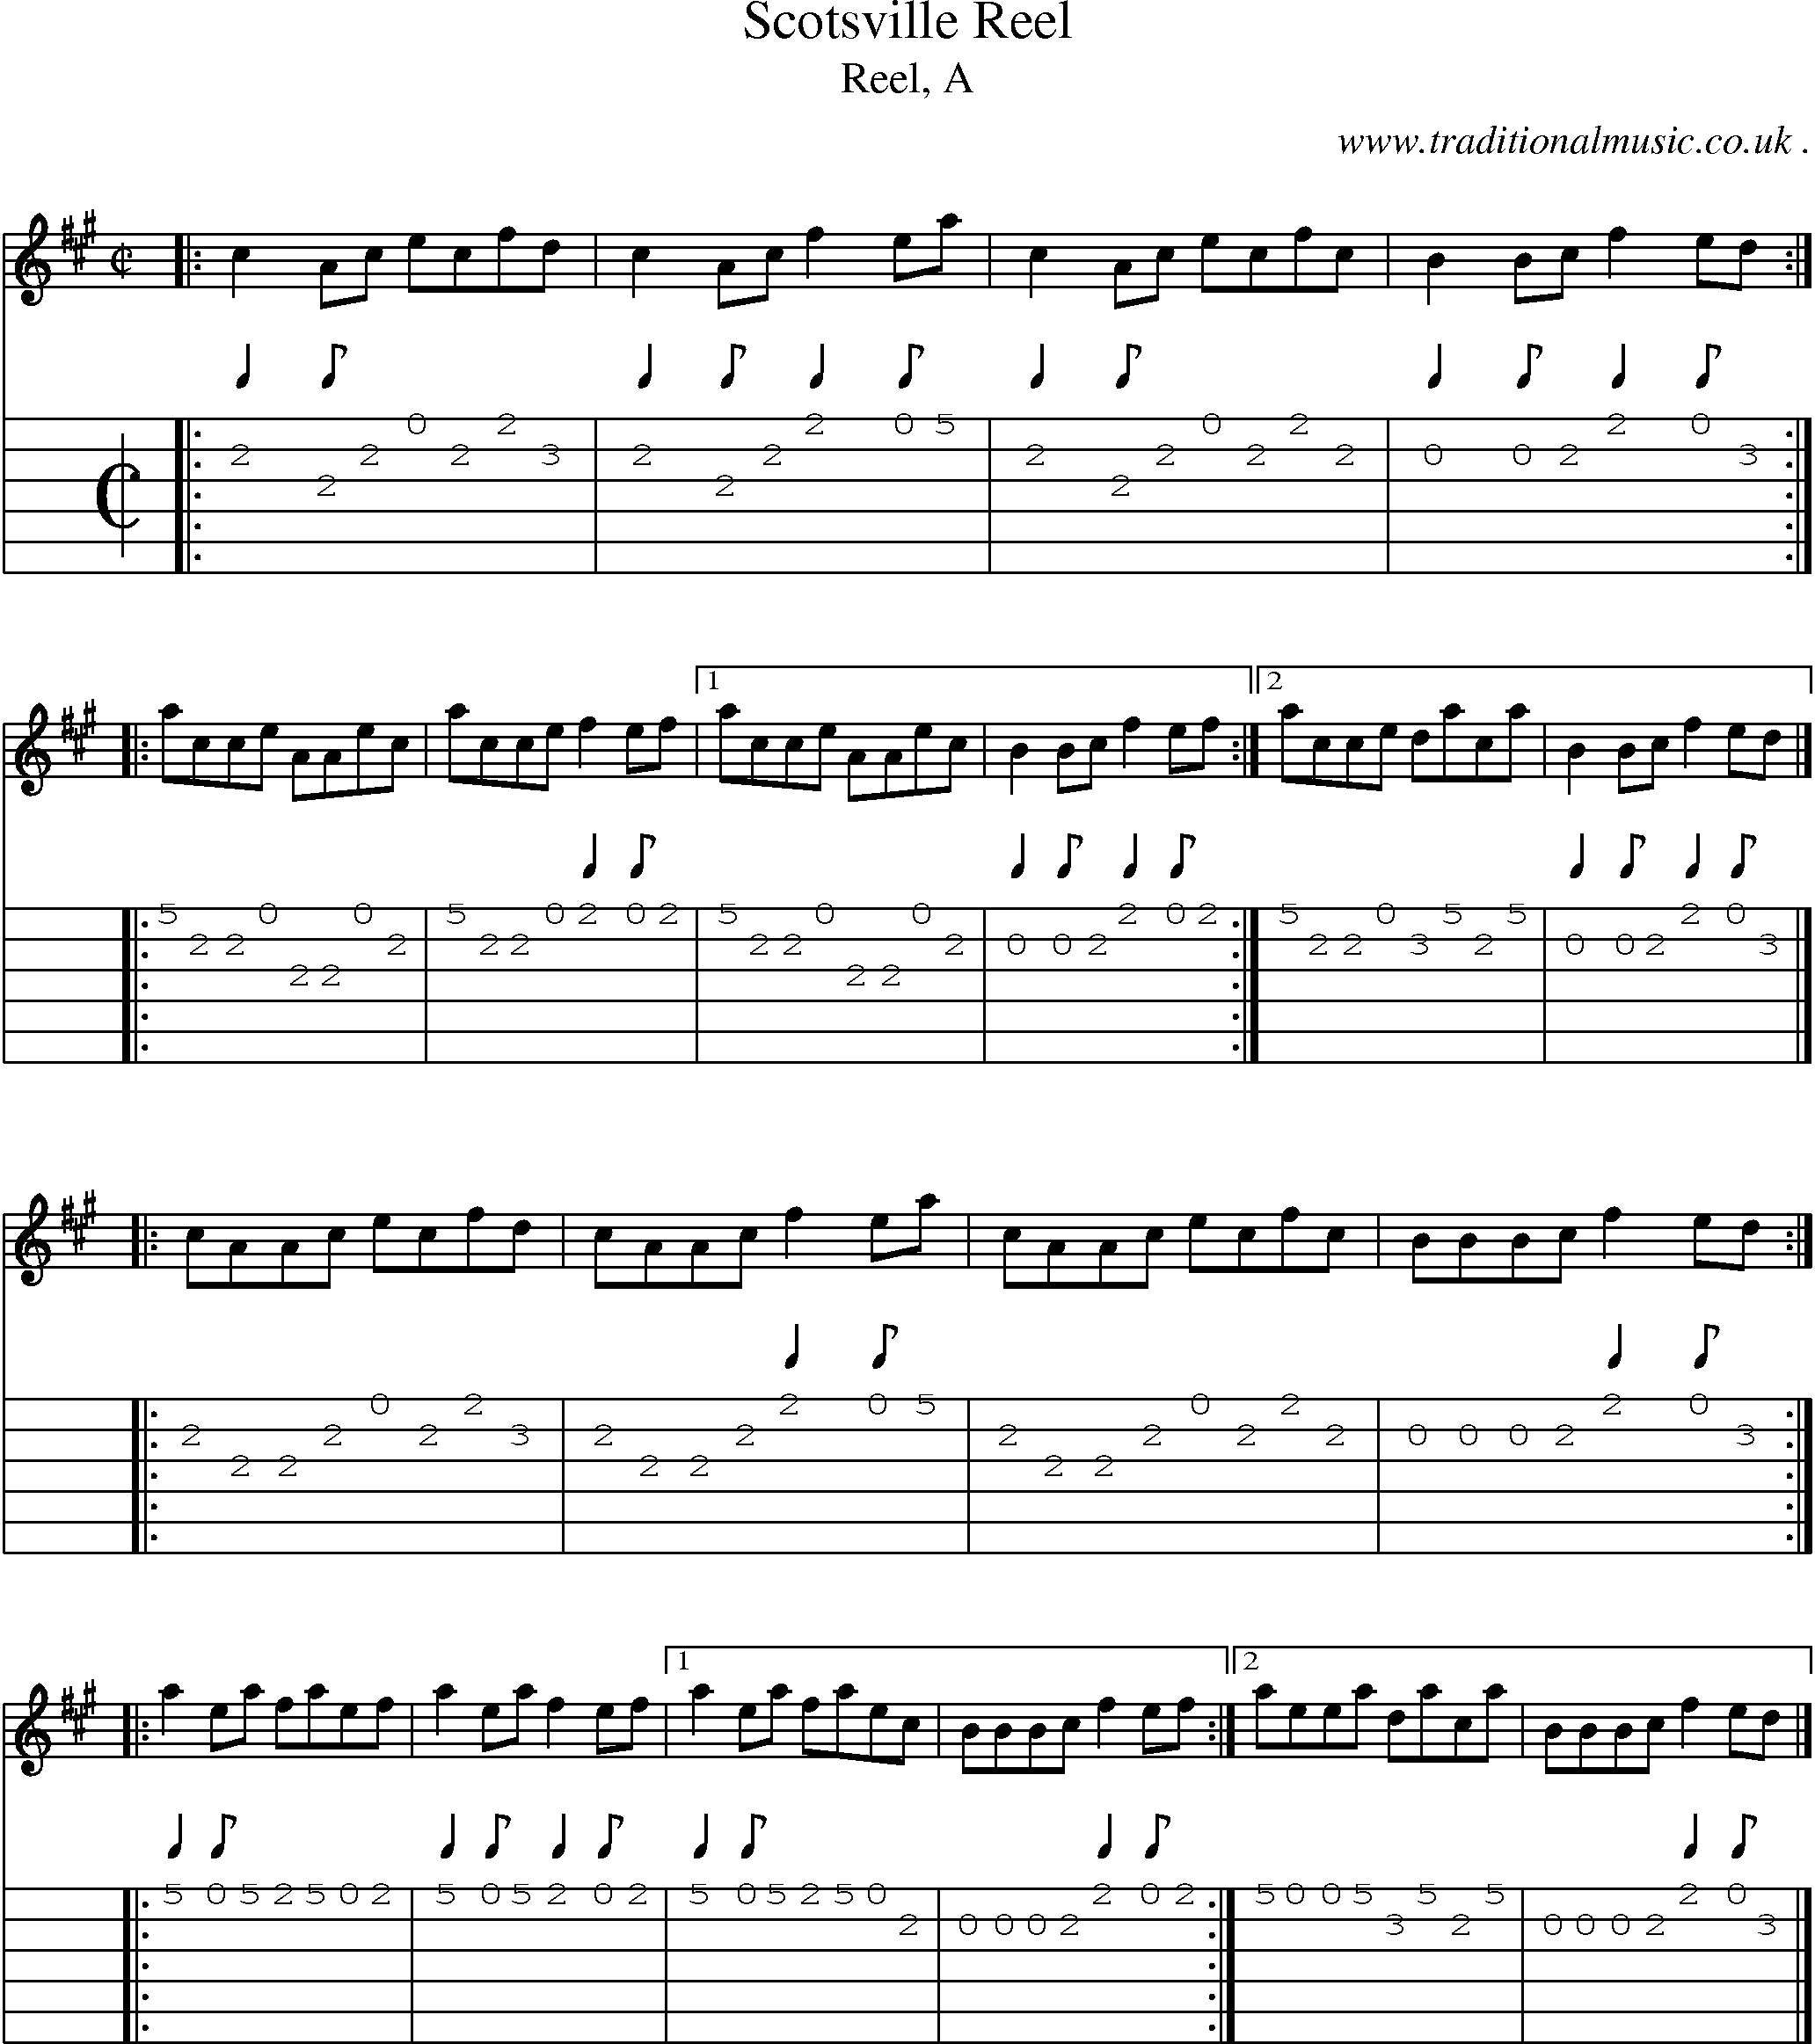 Sheet-music  score, Chords and Guitar Tabs for Scotsville Reel